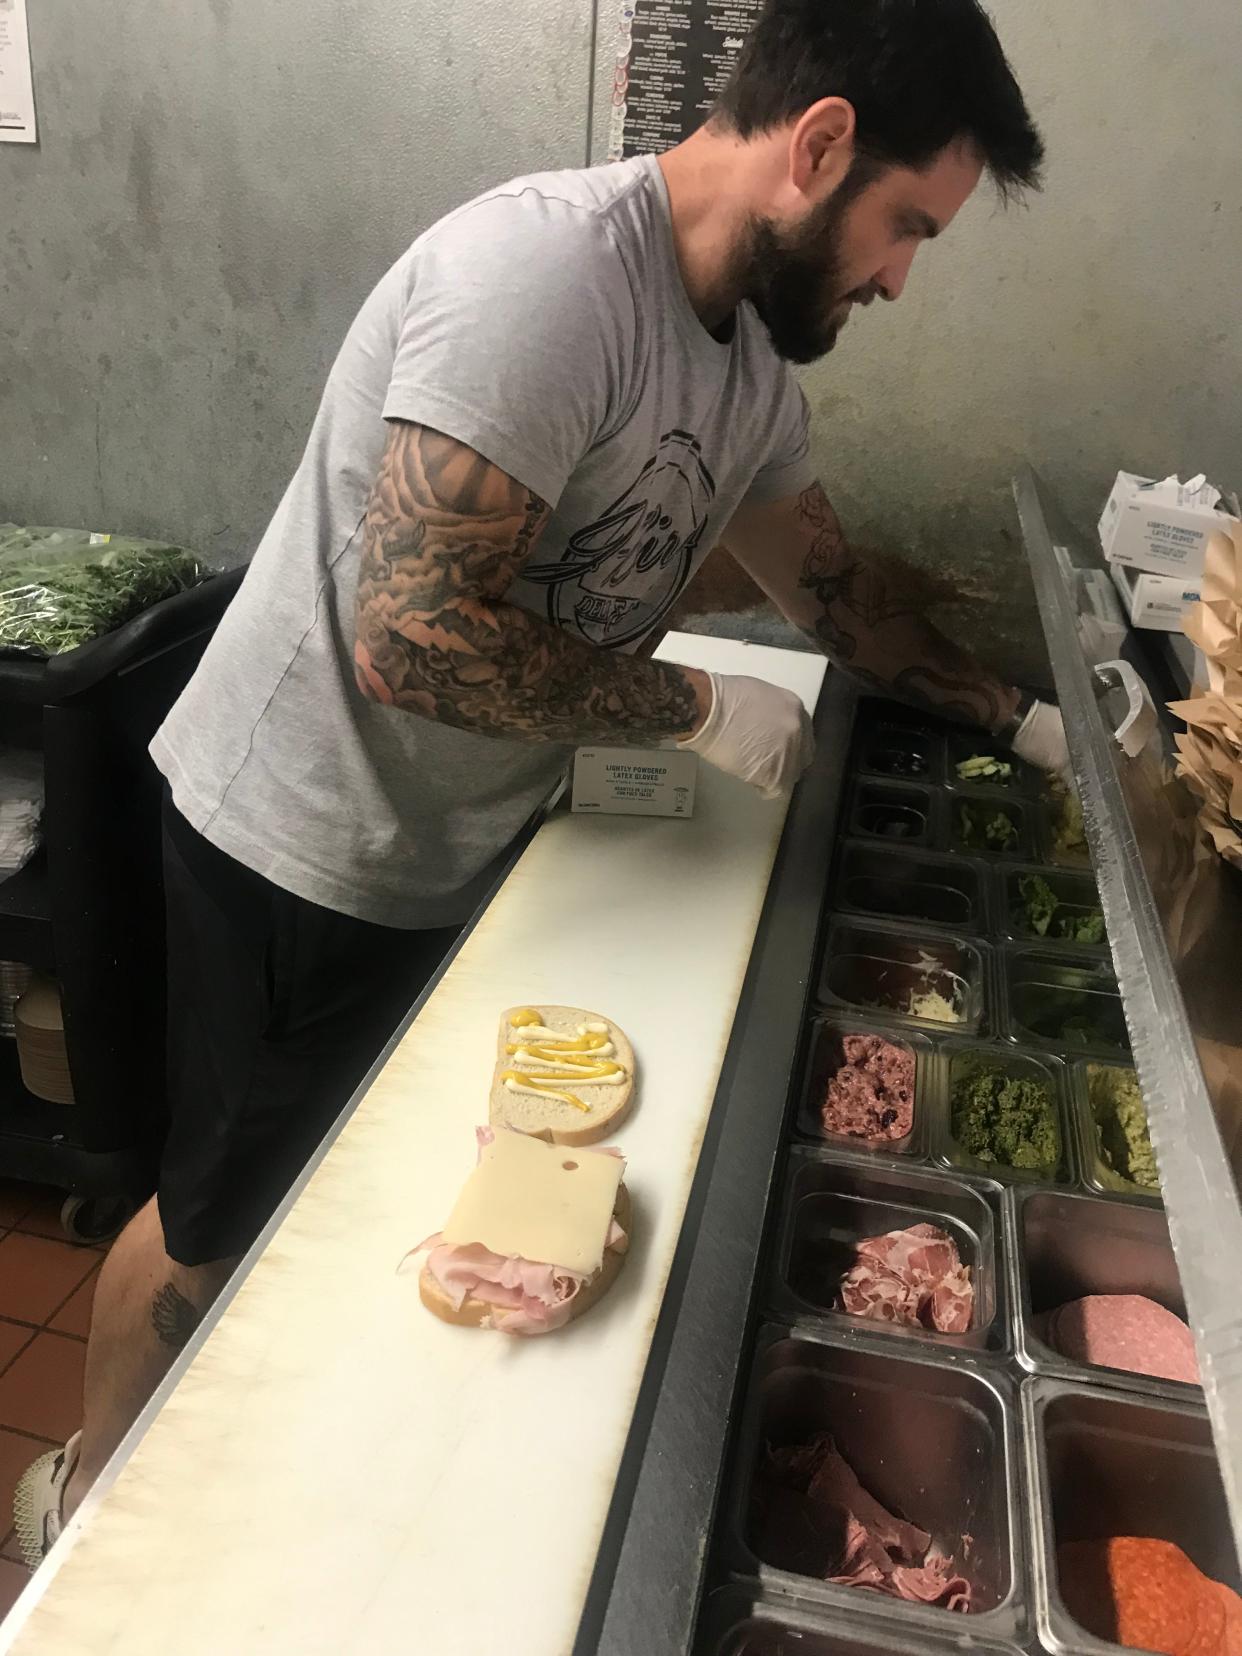 Justin Webber whips up a sandwich from scratch during a photoshoot in the kitchen of his sandwich shop, J-Bird's Deli & Ales.